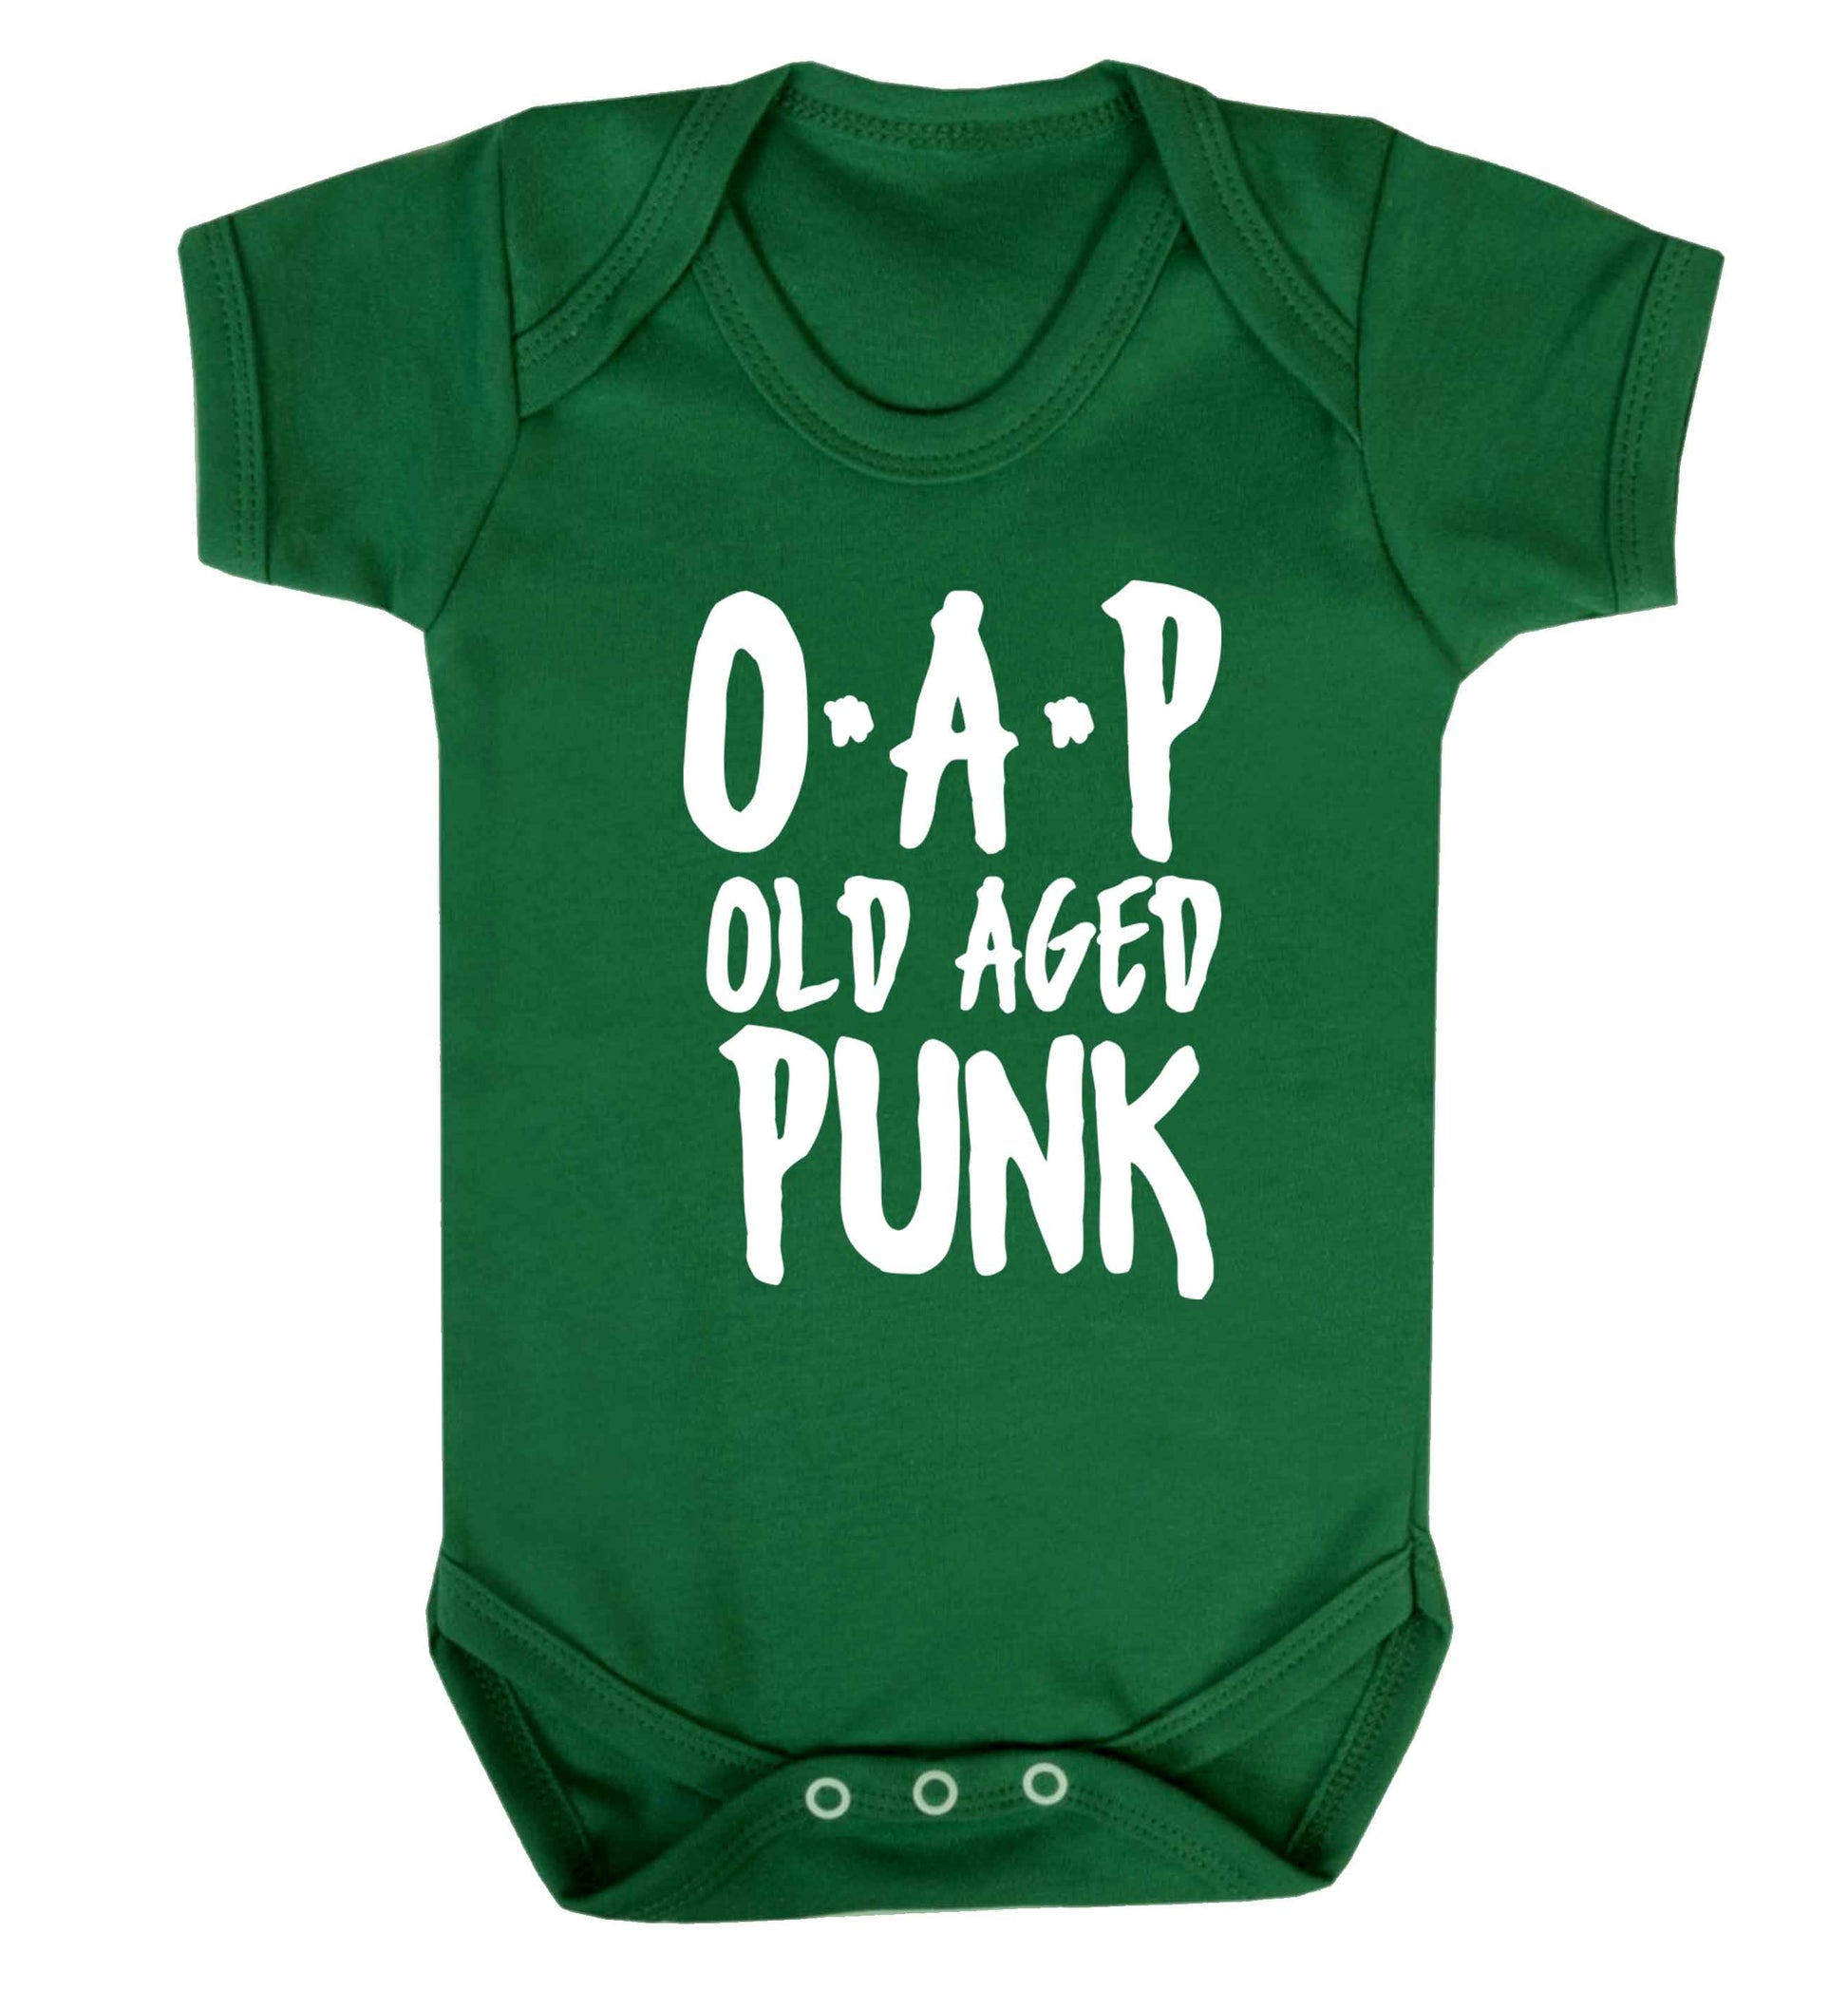 O.A.P Old Age Punk Baby Vest green 18-24 months